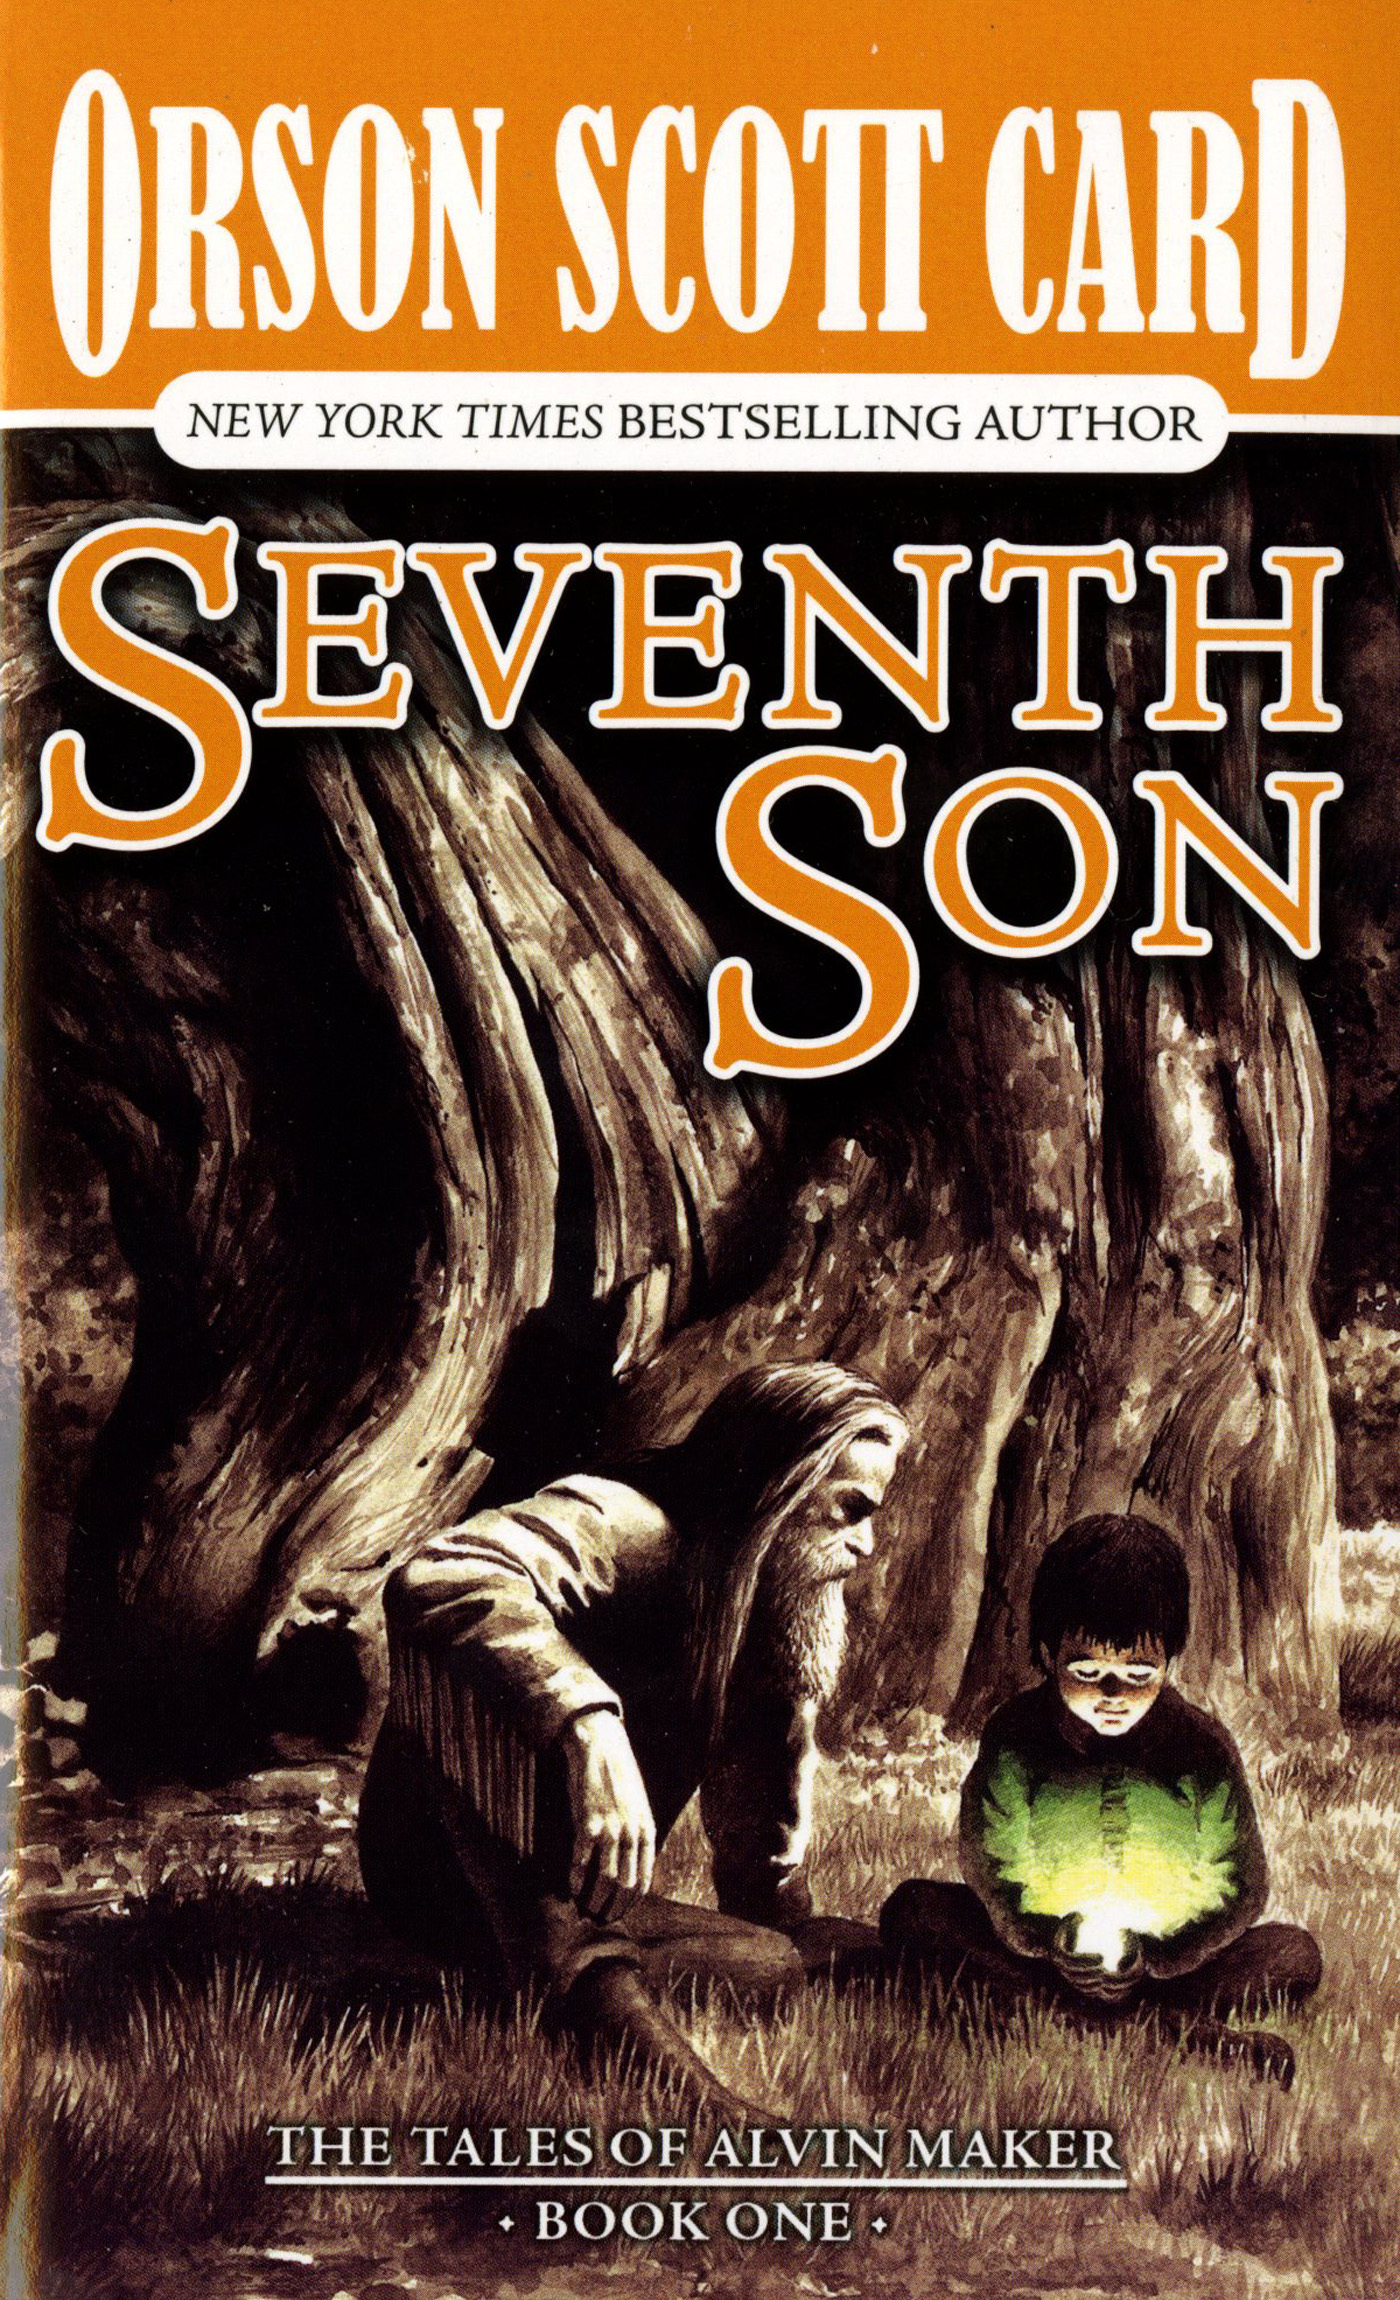 Seventh Son : The Tales of Alvin Maker, Book One by Orson Scott Card